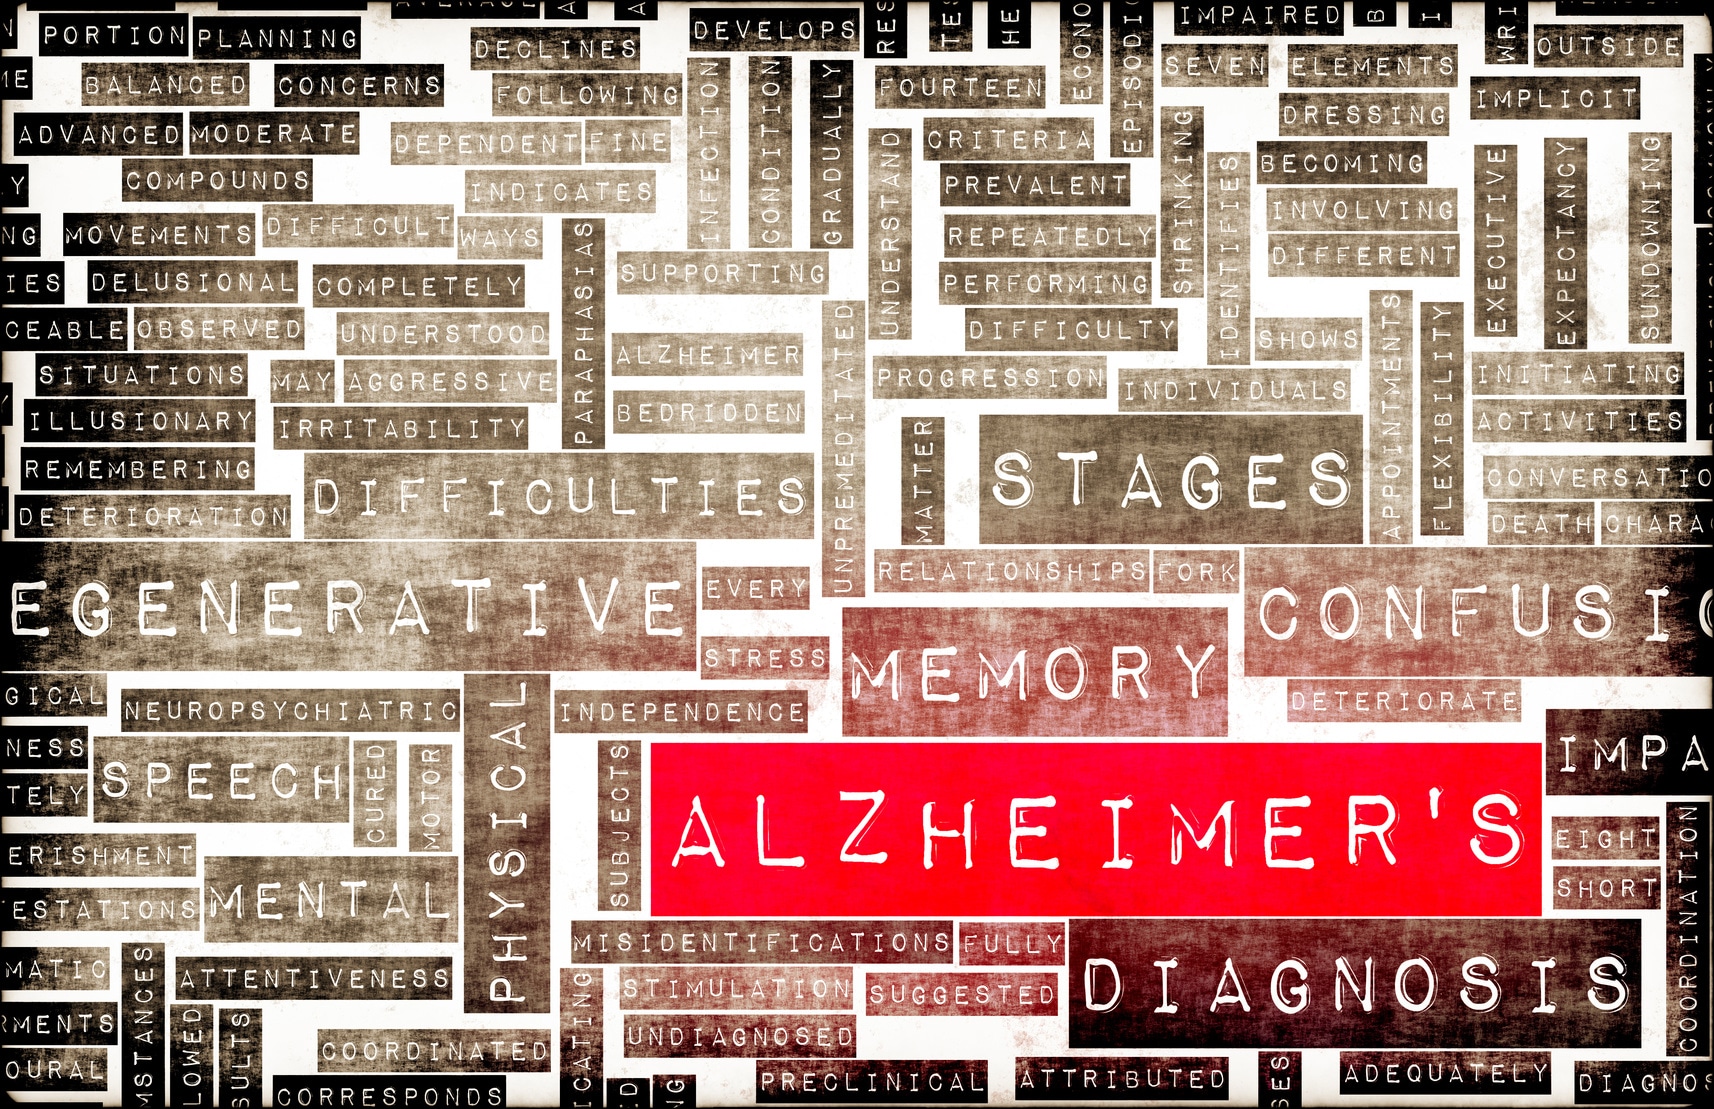 Alliance for Aging Research Responds to Senate Finance Subcommittee on Health Care RFI on Alzheimer’s Disease